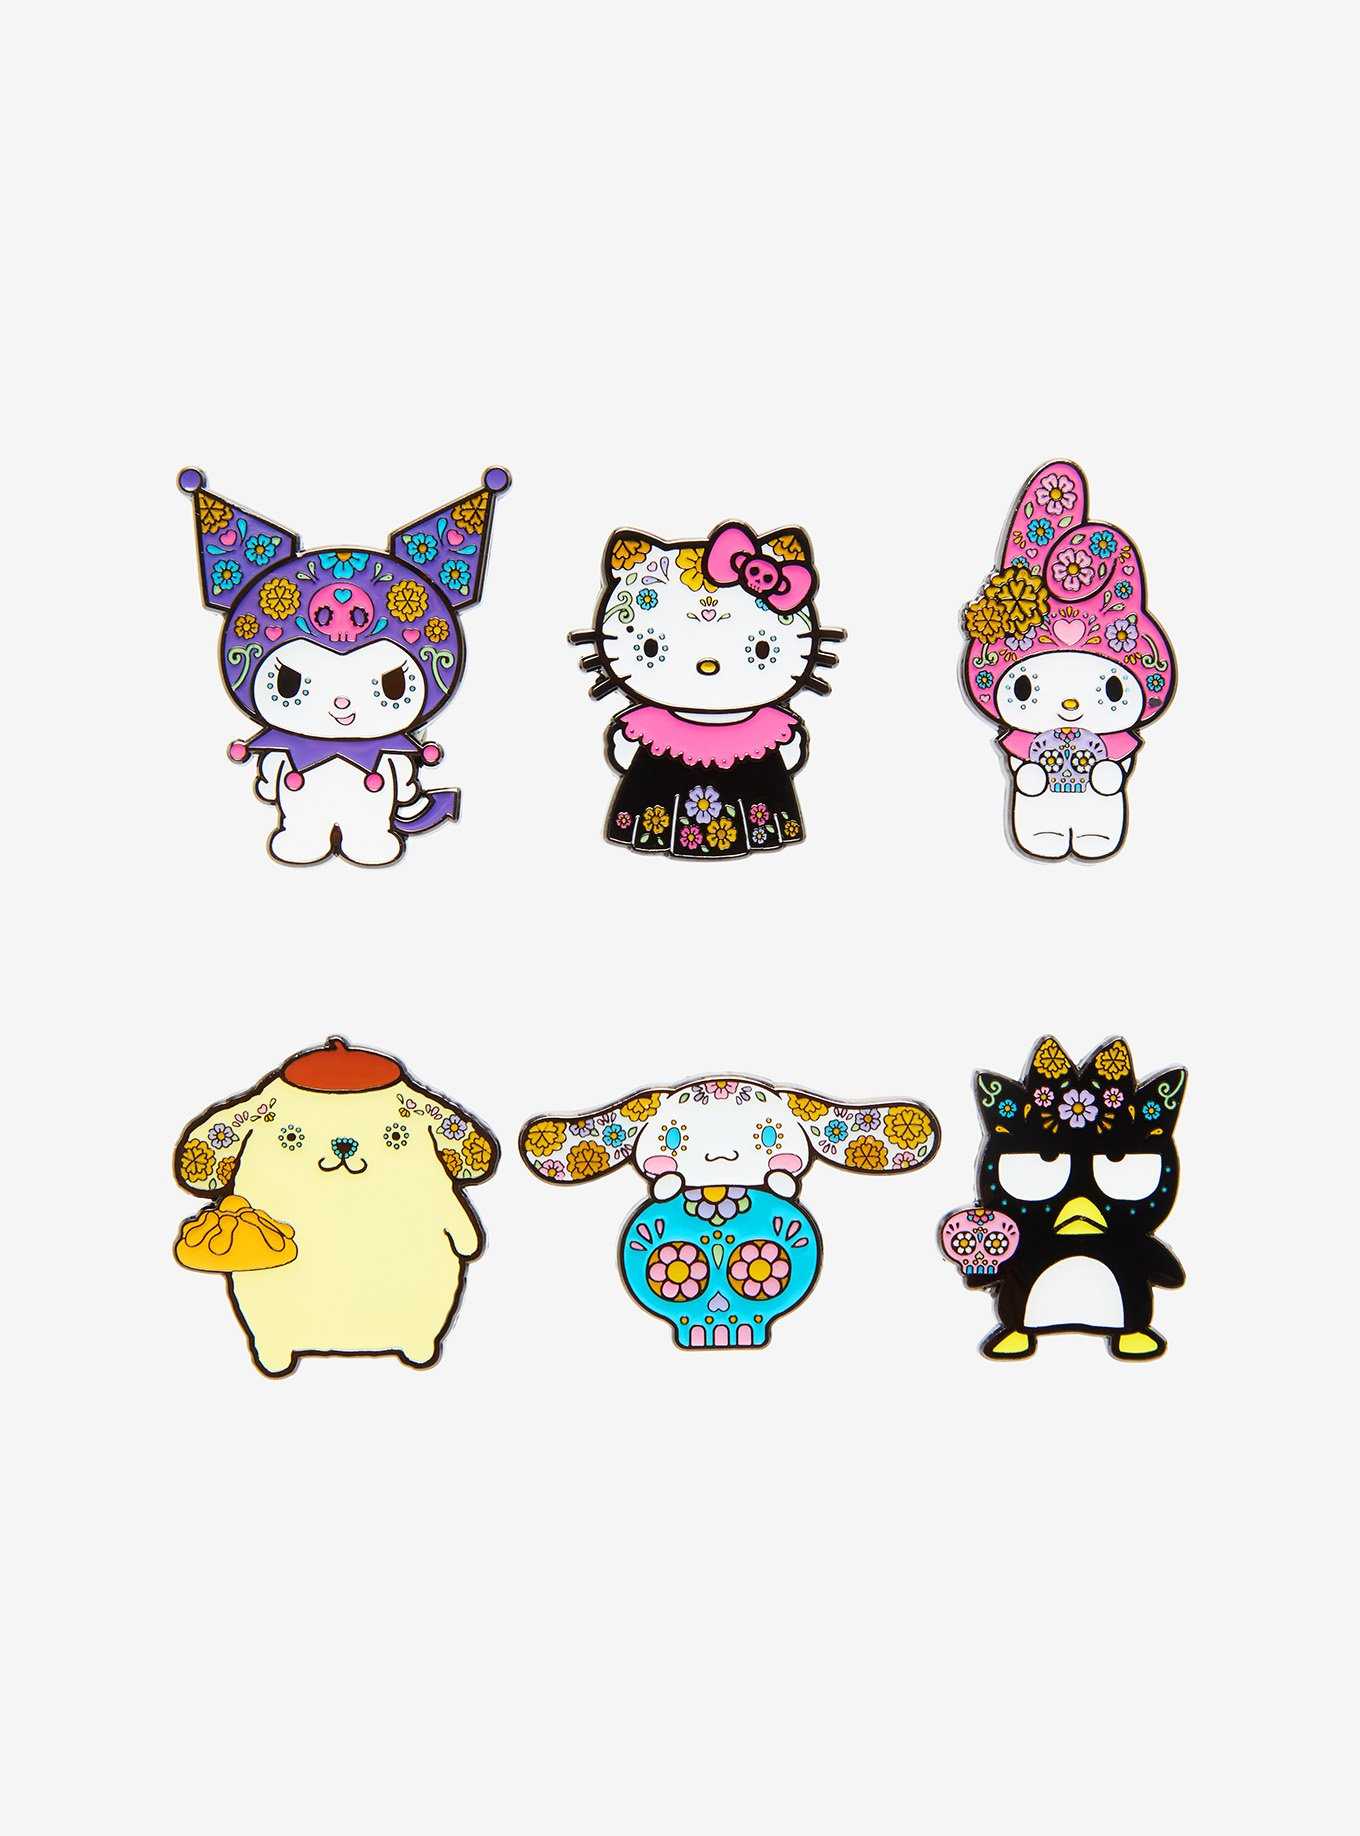 OFFICIAL Hello Kitty Pins